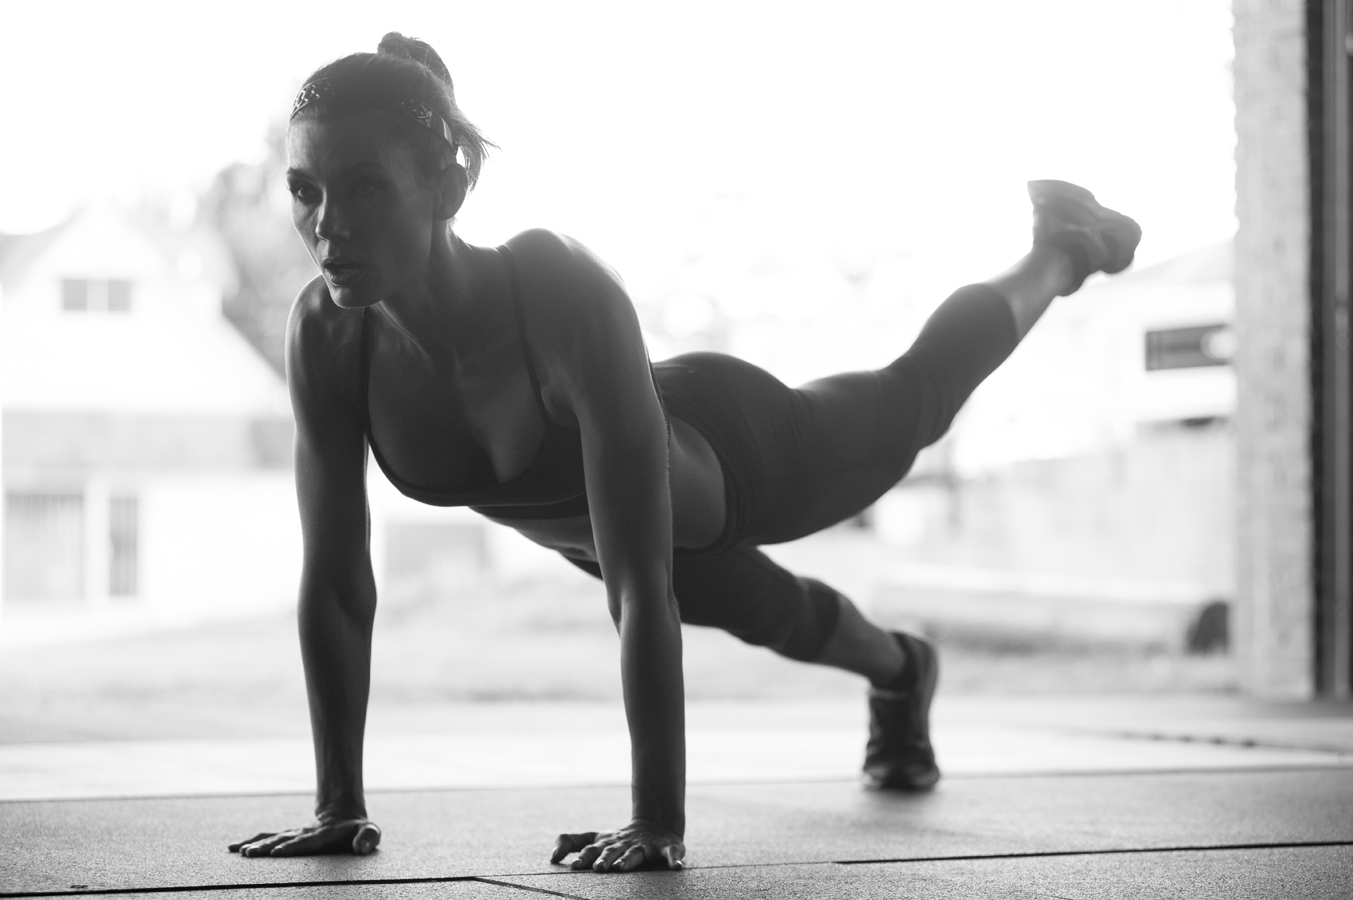 Fit women stretching in Black and White

Kenneth M. Ruggiano is a Tulsa Oklahoma Based Photographer specializing in Sports and Fitness Photography